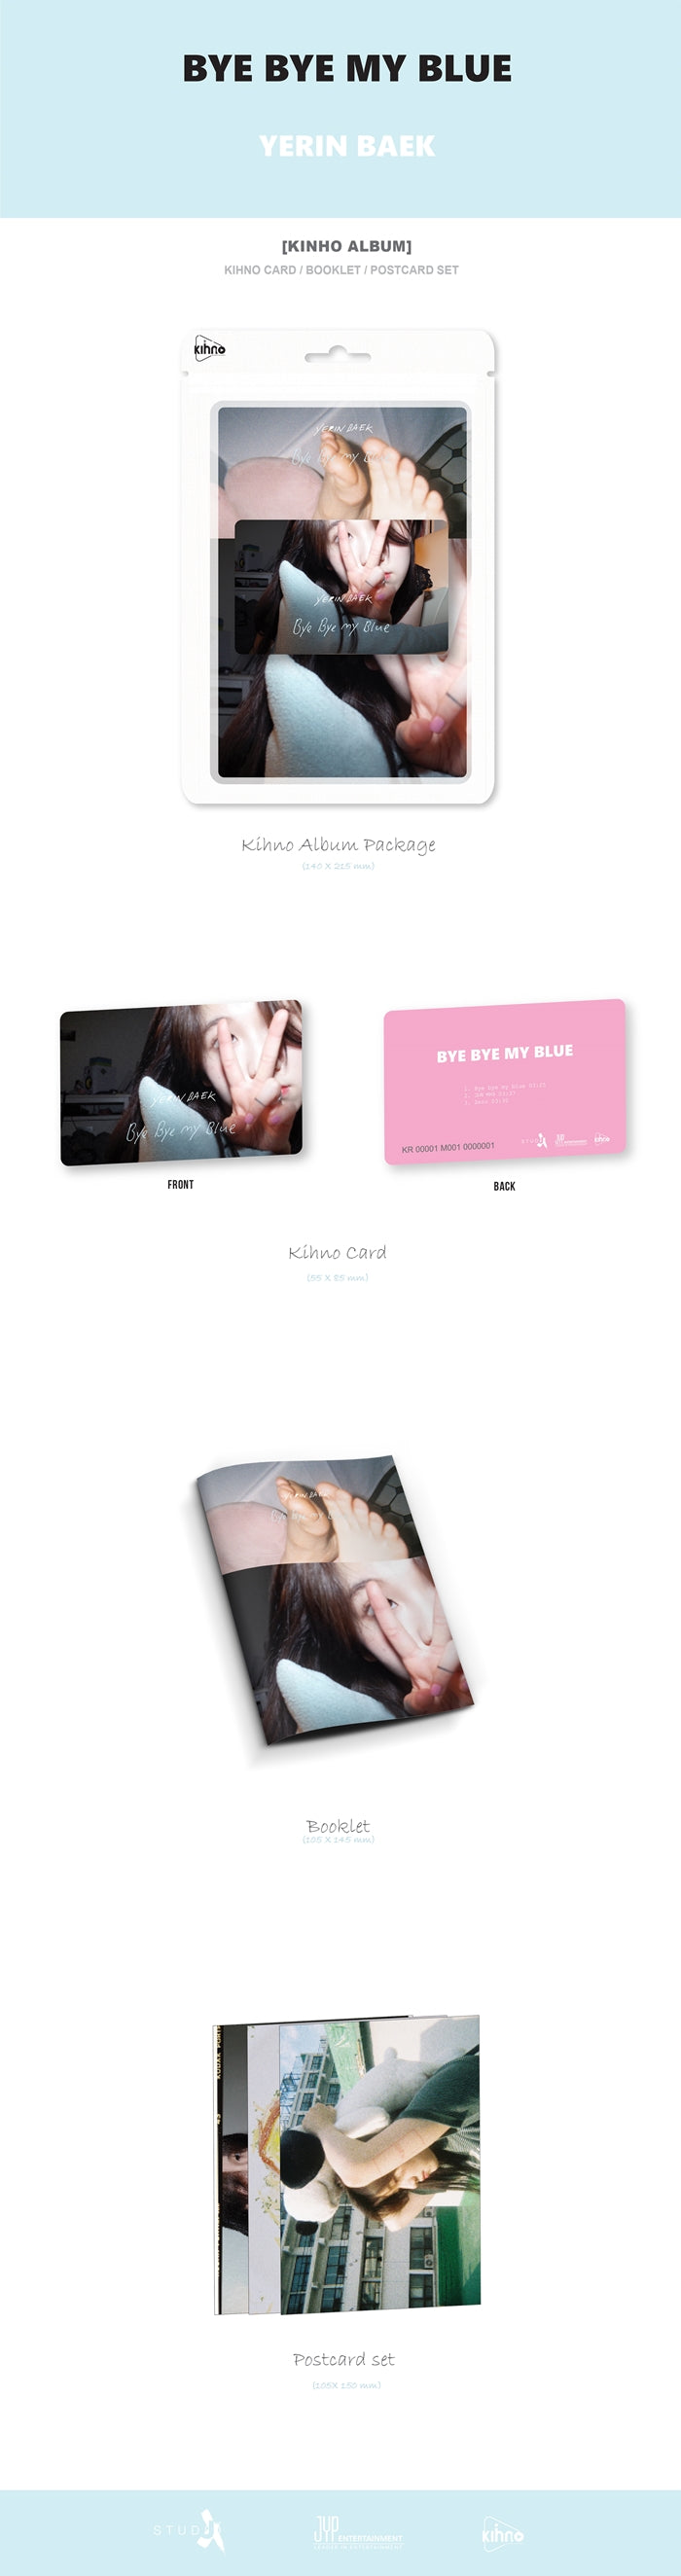 1 Kihno Card
3 Post Cards
1 Photo Book (16 pages)